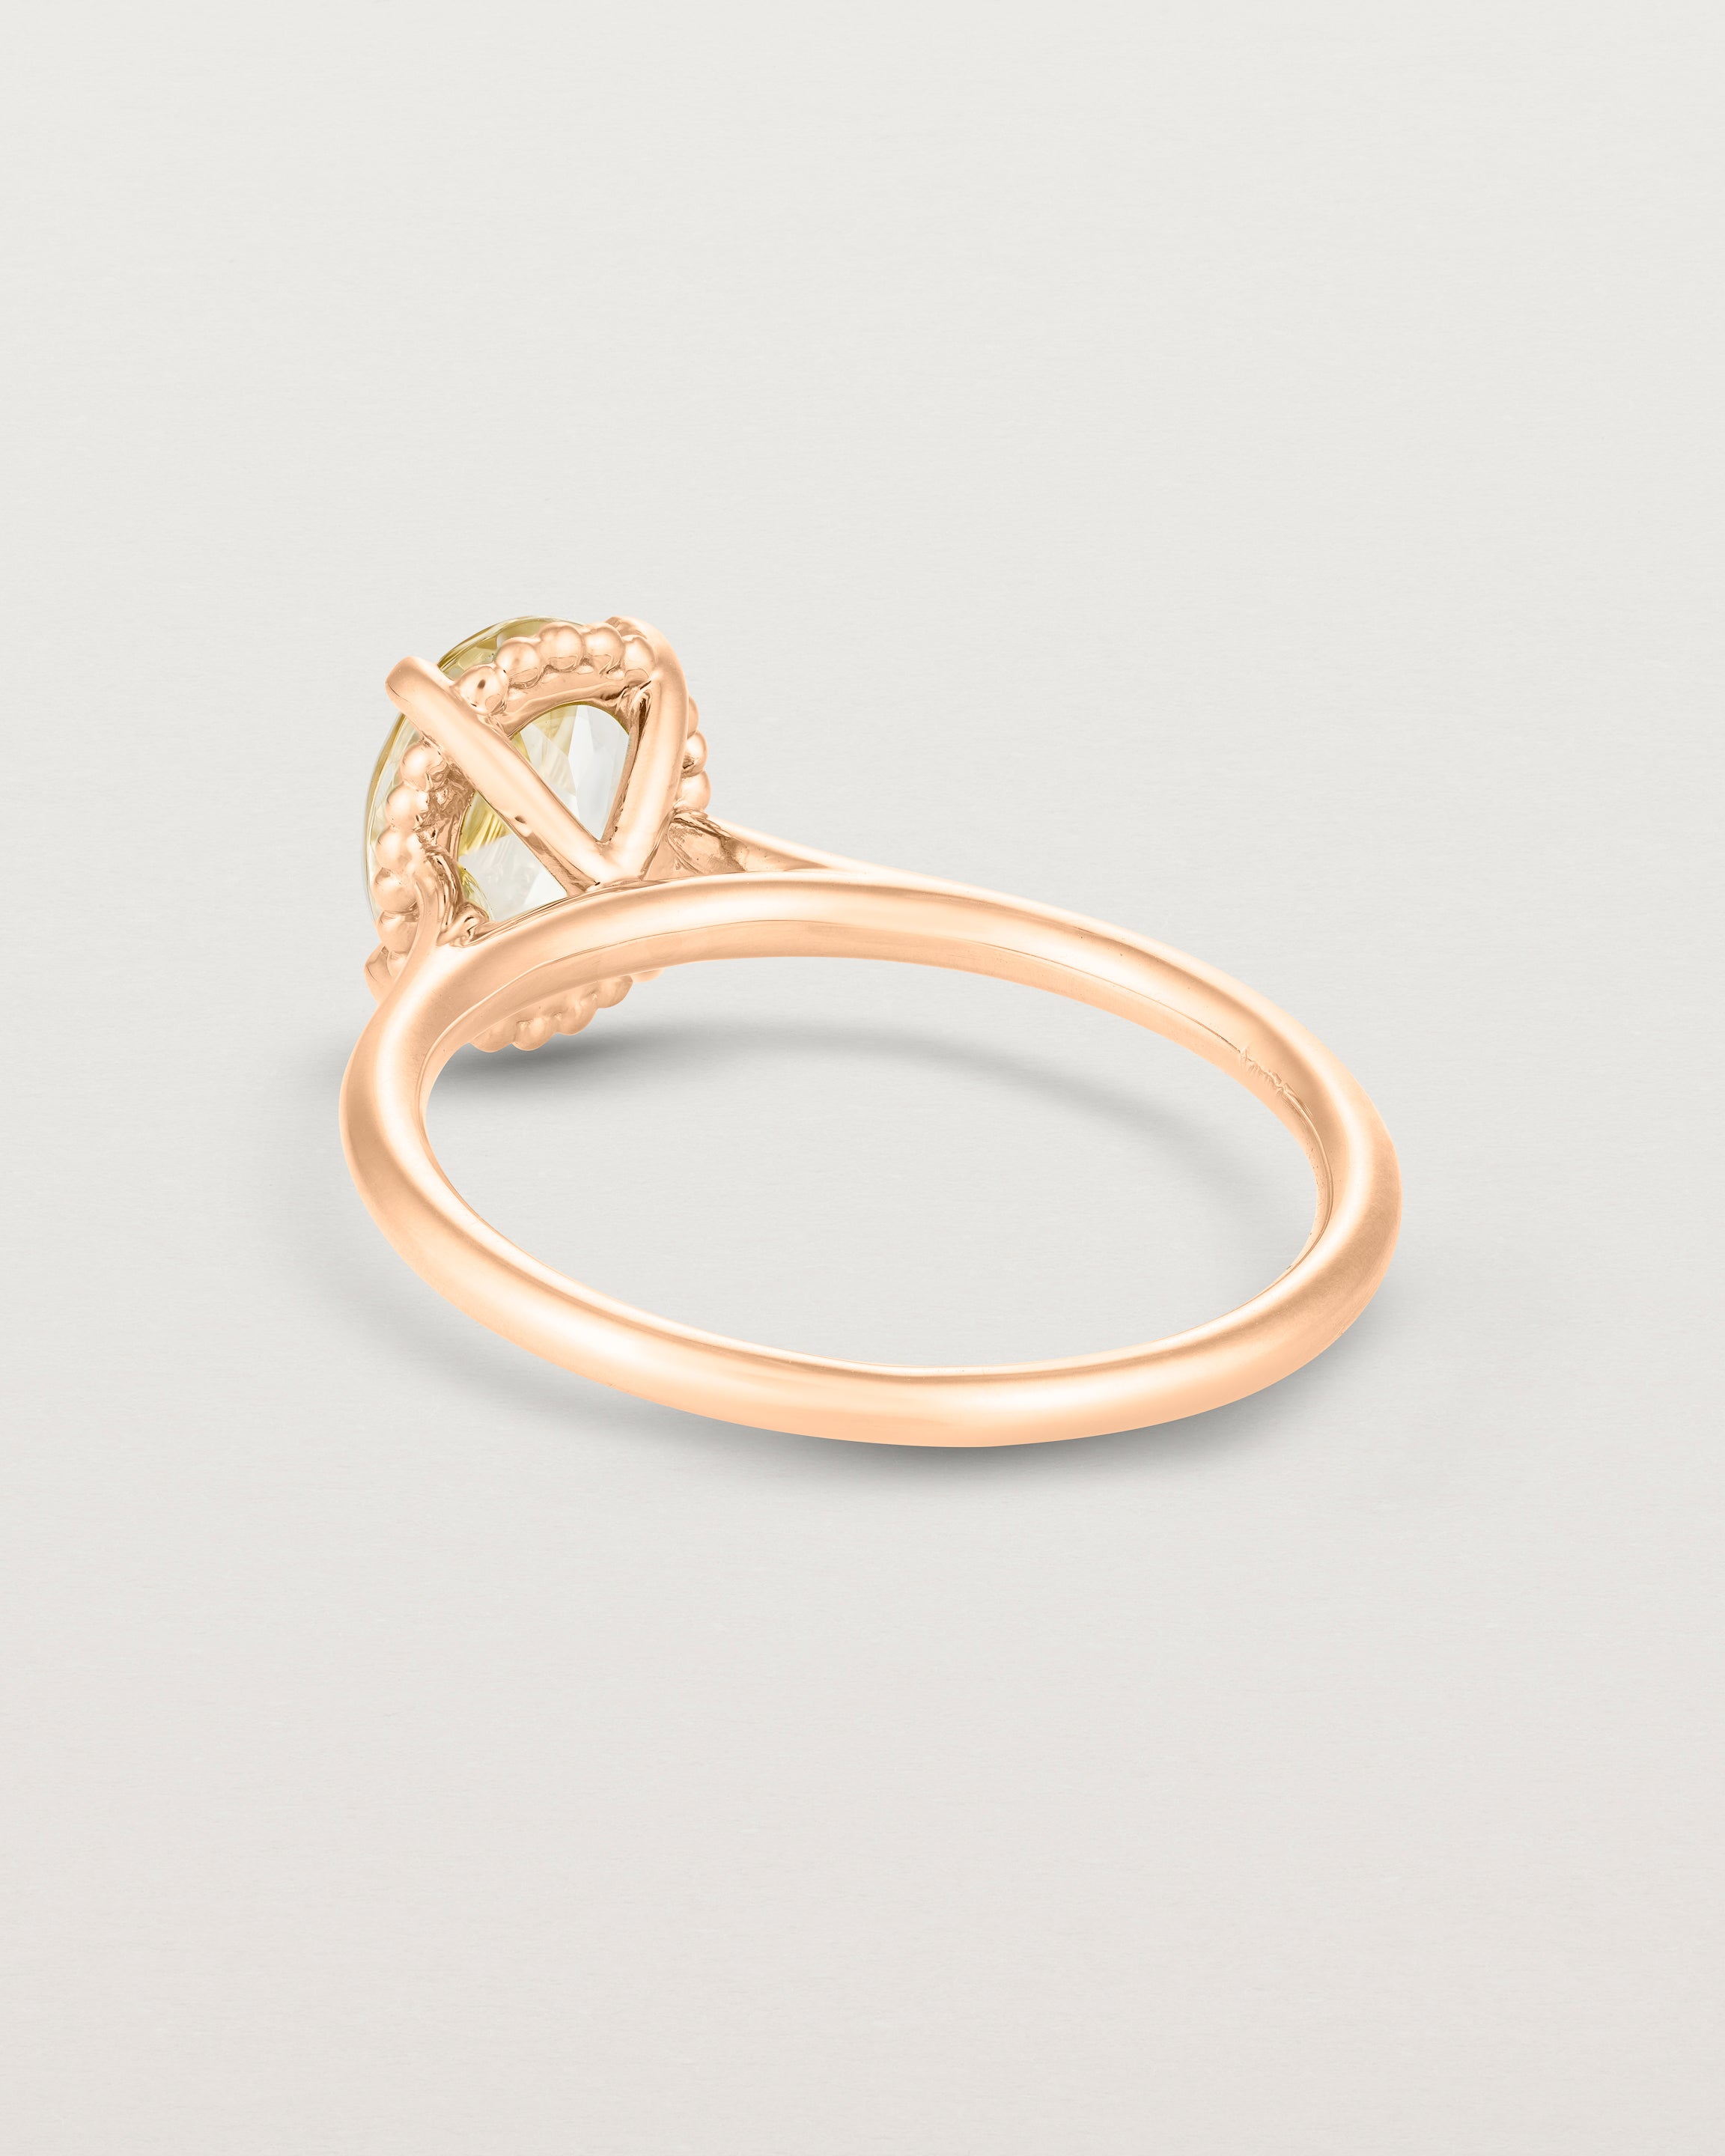 Back view of the Thea Oval Solitaire | Savannah Sunstone in rose gold.